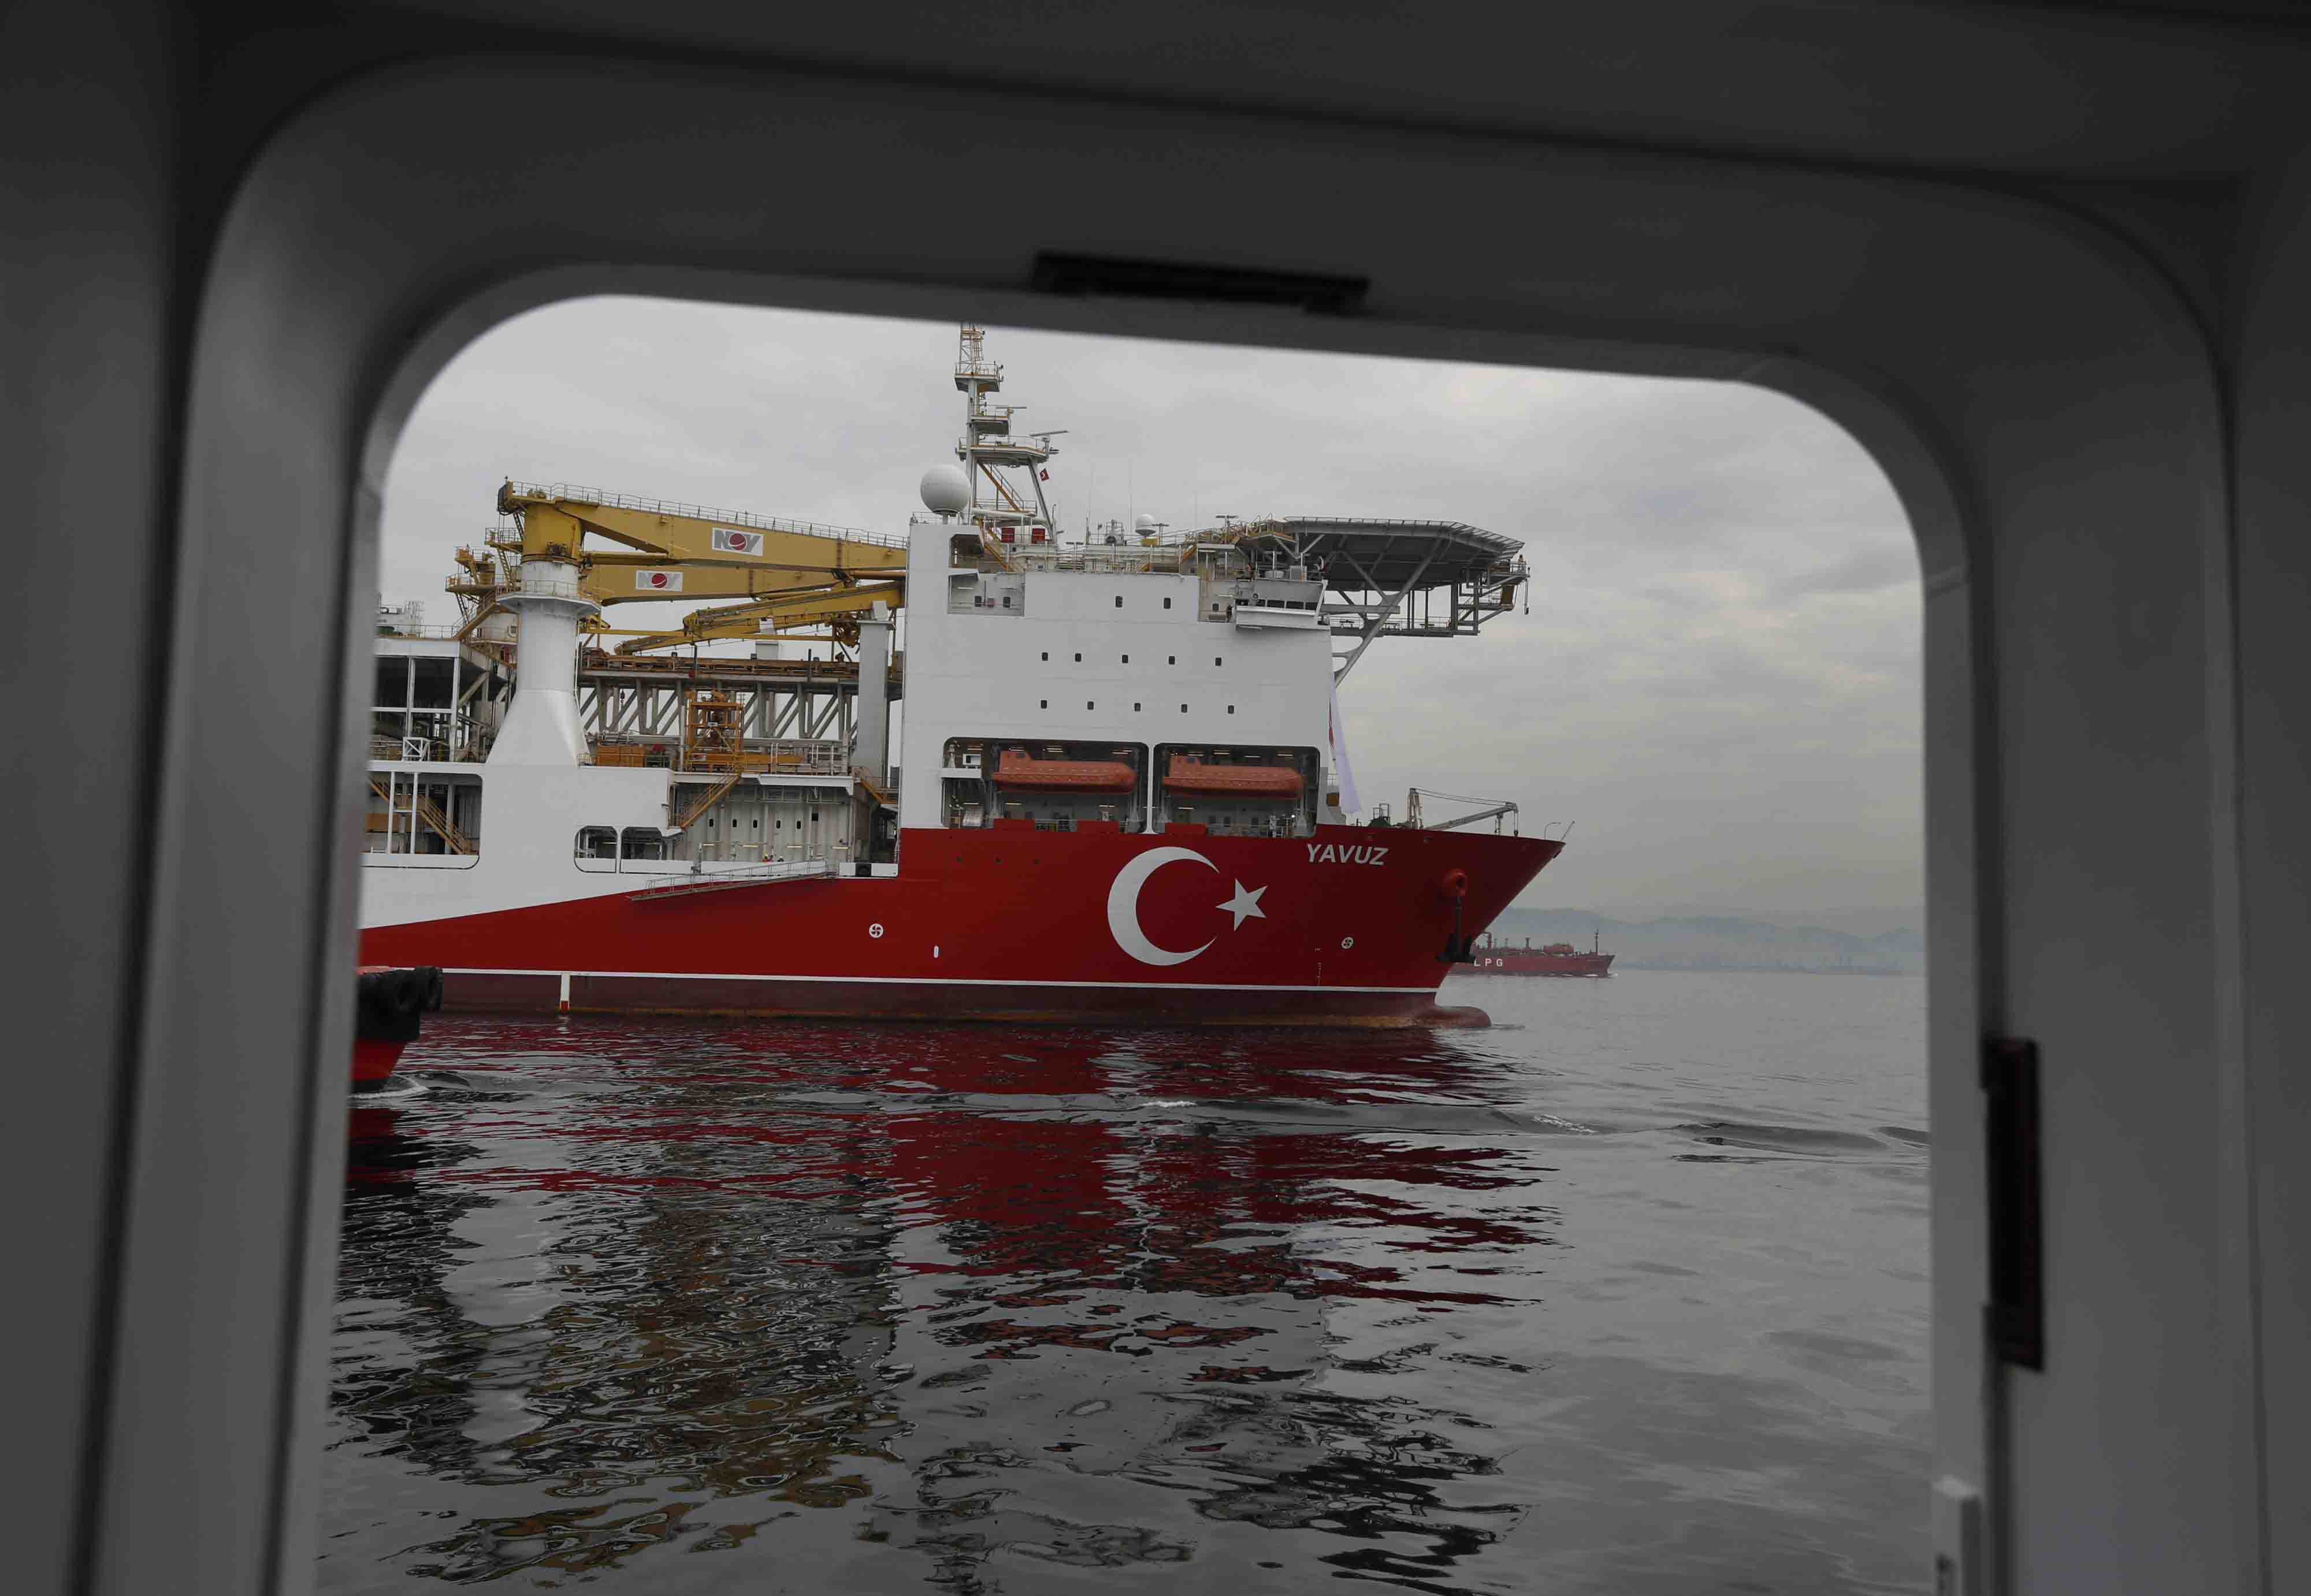 "The drilling activities of our ship Yavuz are based on legal and legitimate grounds," the Turkish foreign ministry said